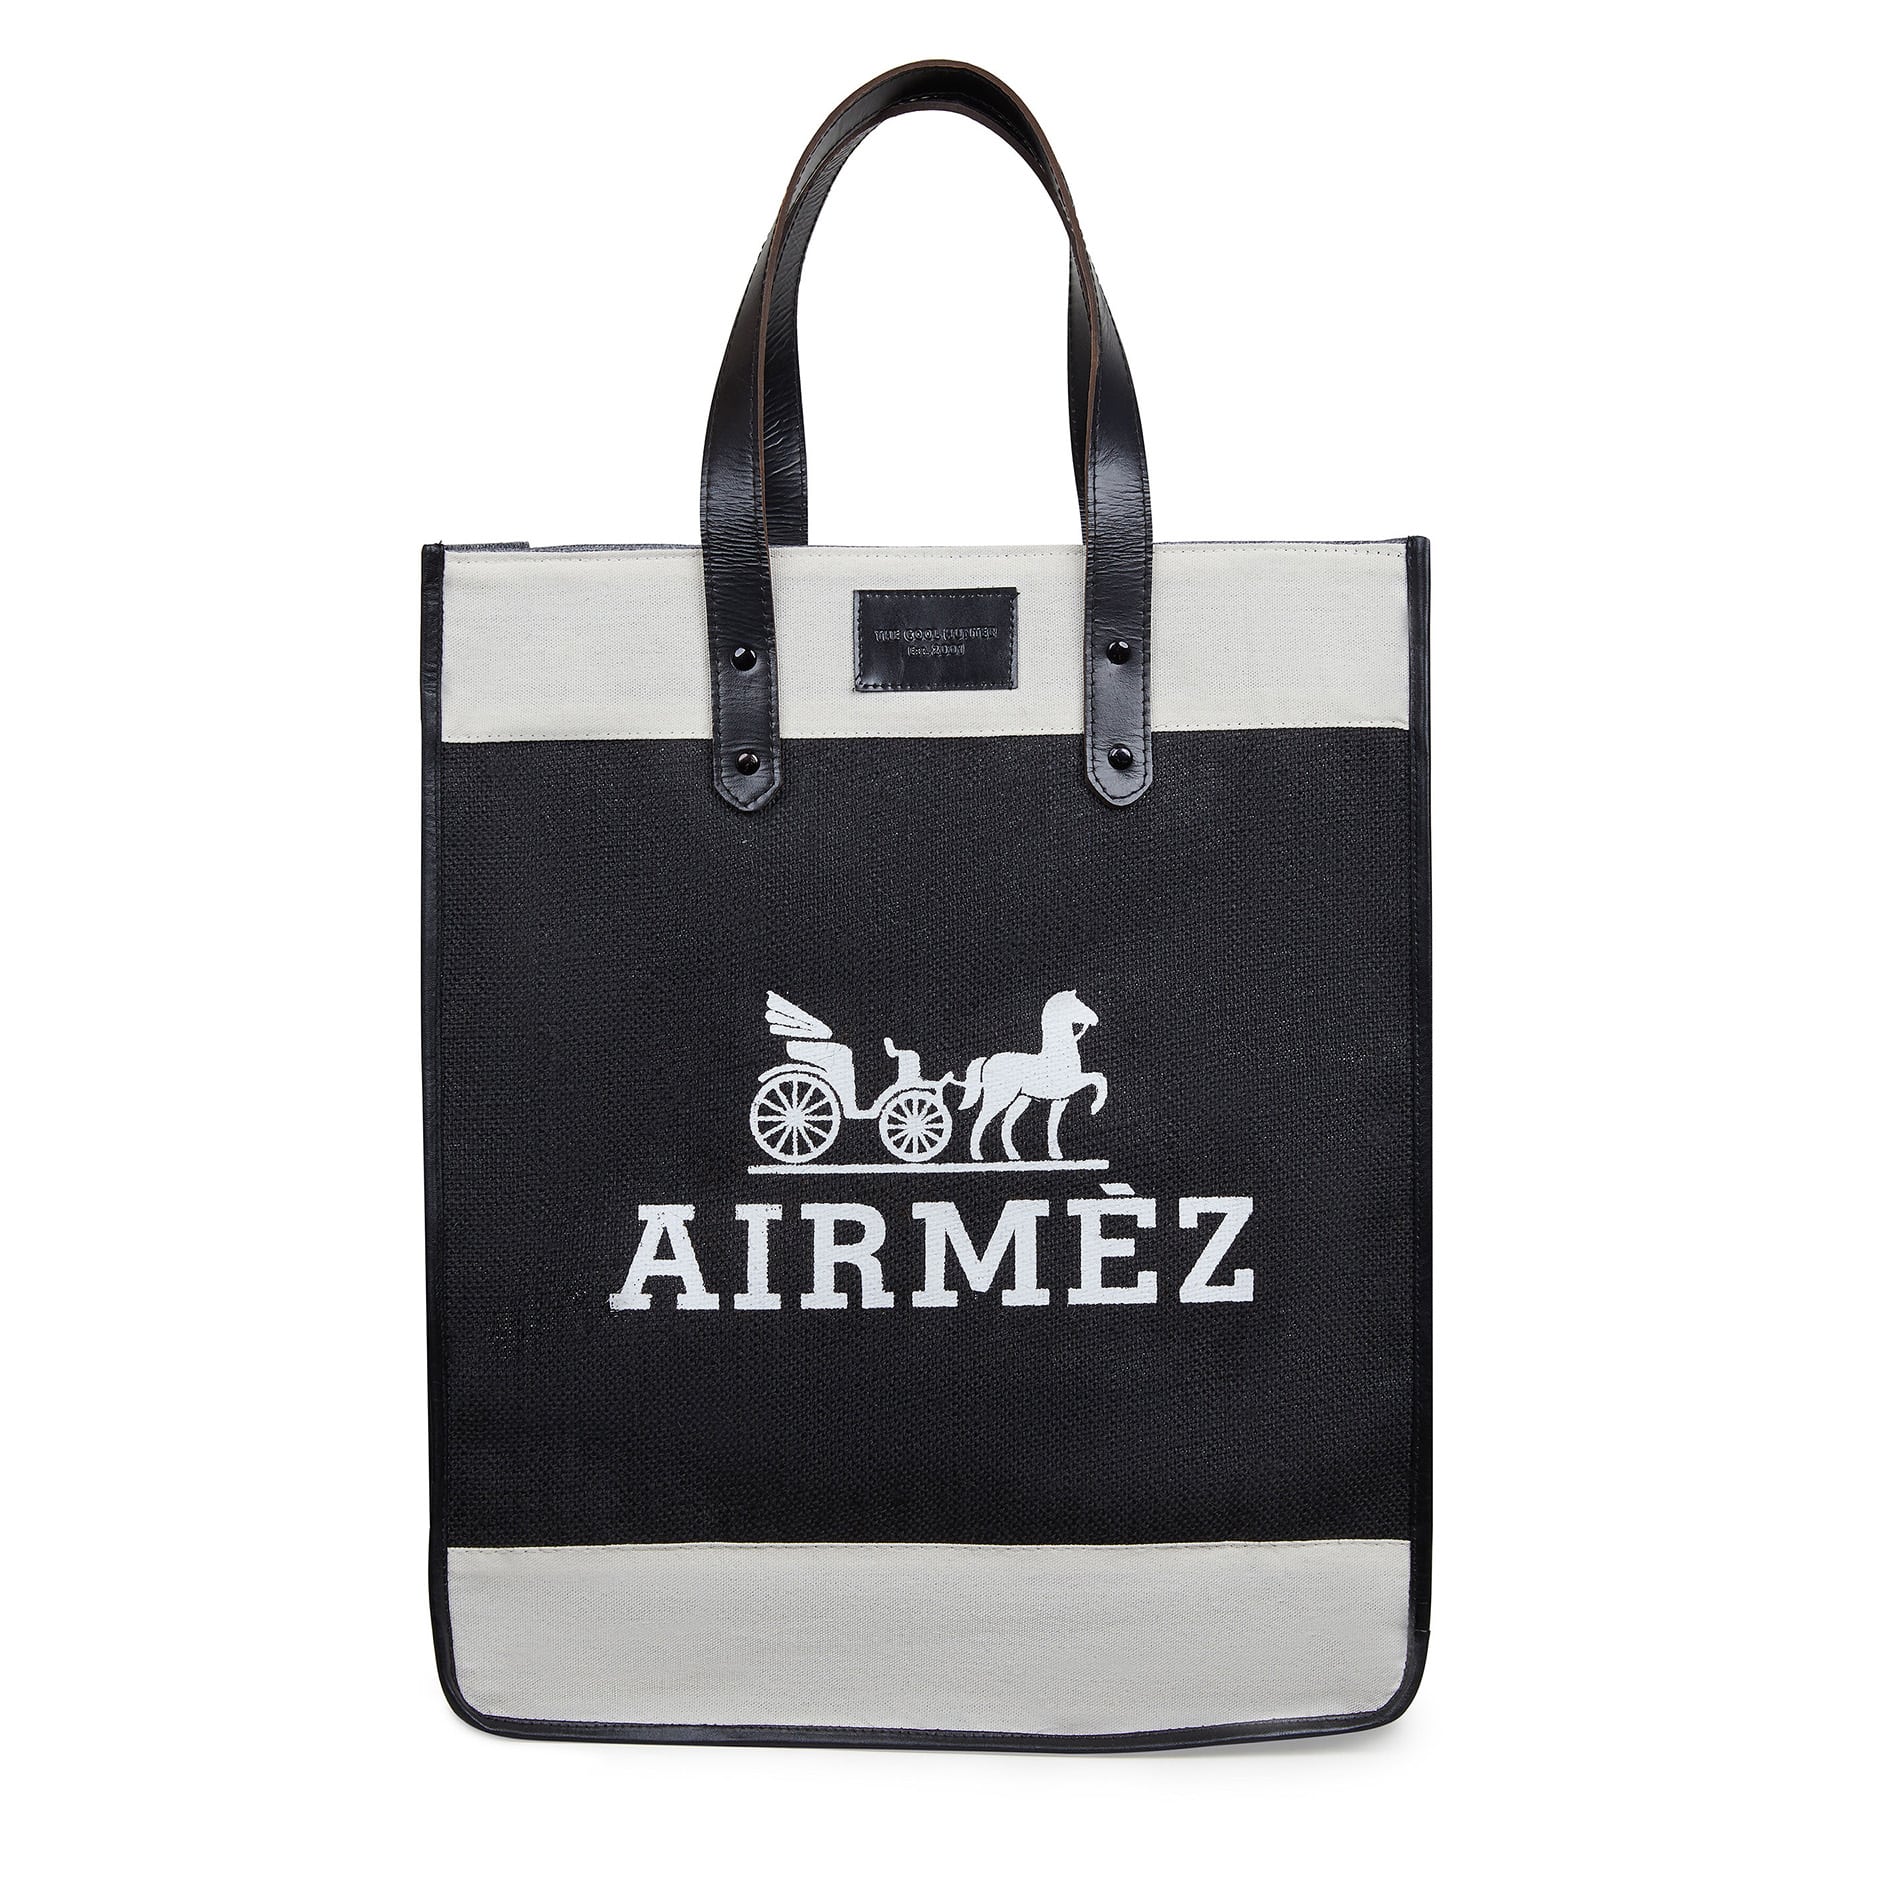 A black and white Airmez tote bag with black handles. The bag features a white graphic of a horse-drawn carriage with a rider and the word "Airmez" printed below the graphic.